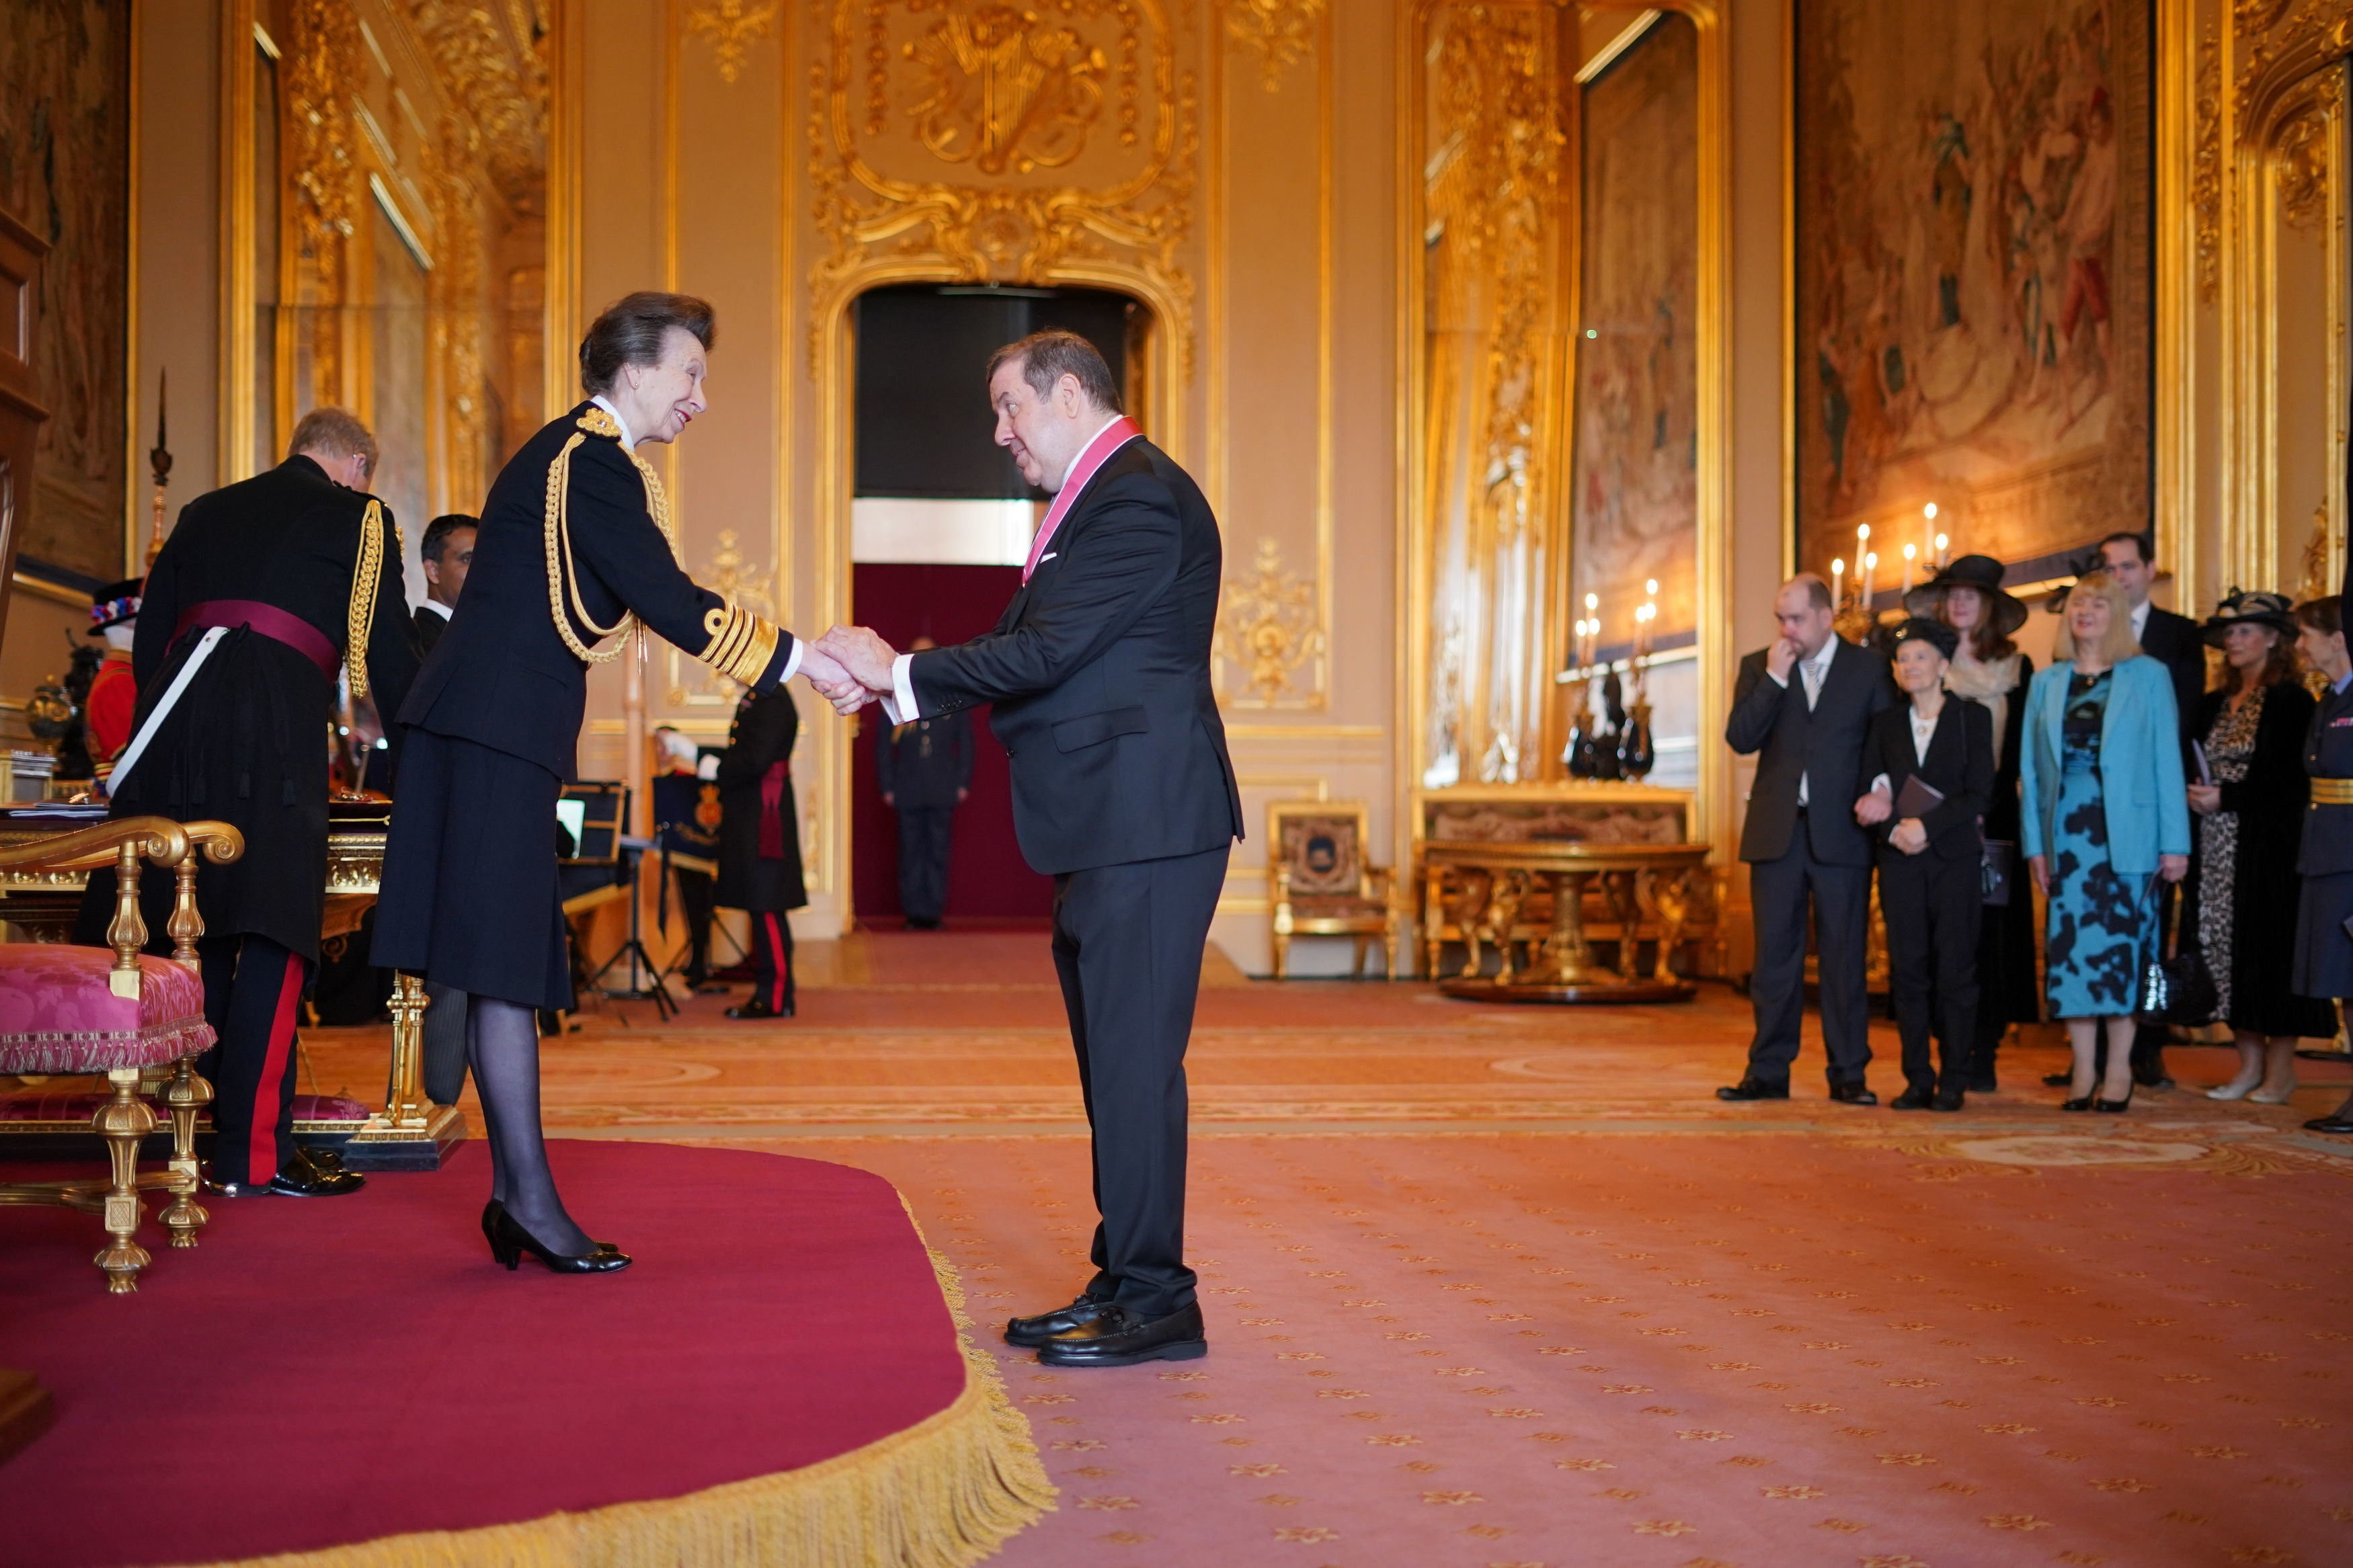 The Princess Royal carried out an investiture ceremony at Windsor Castle